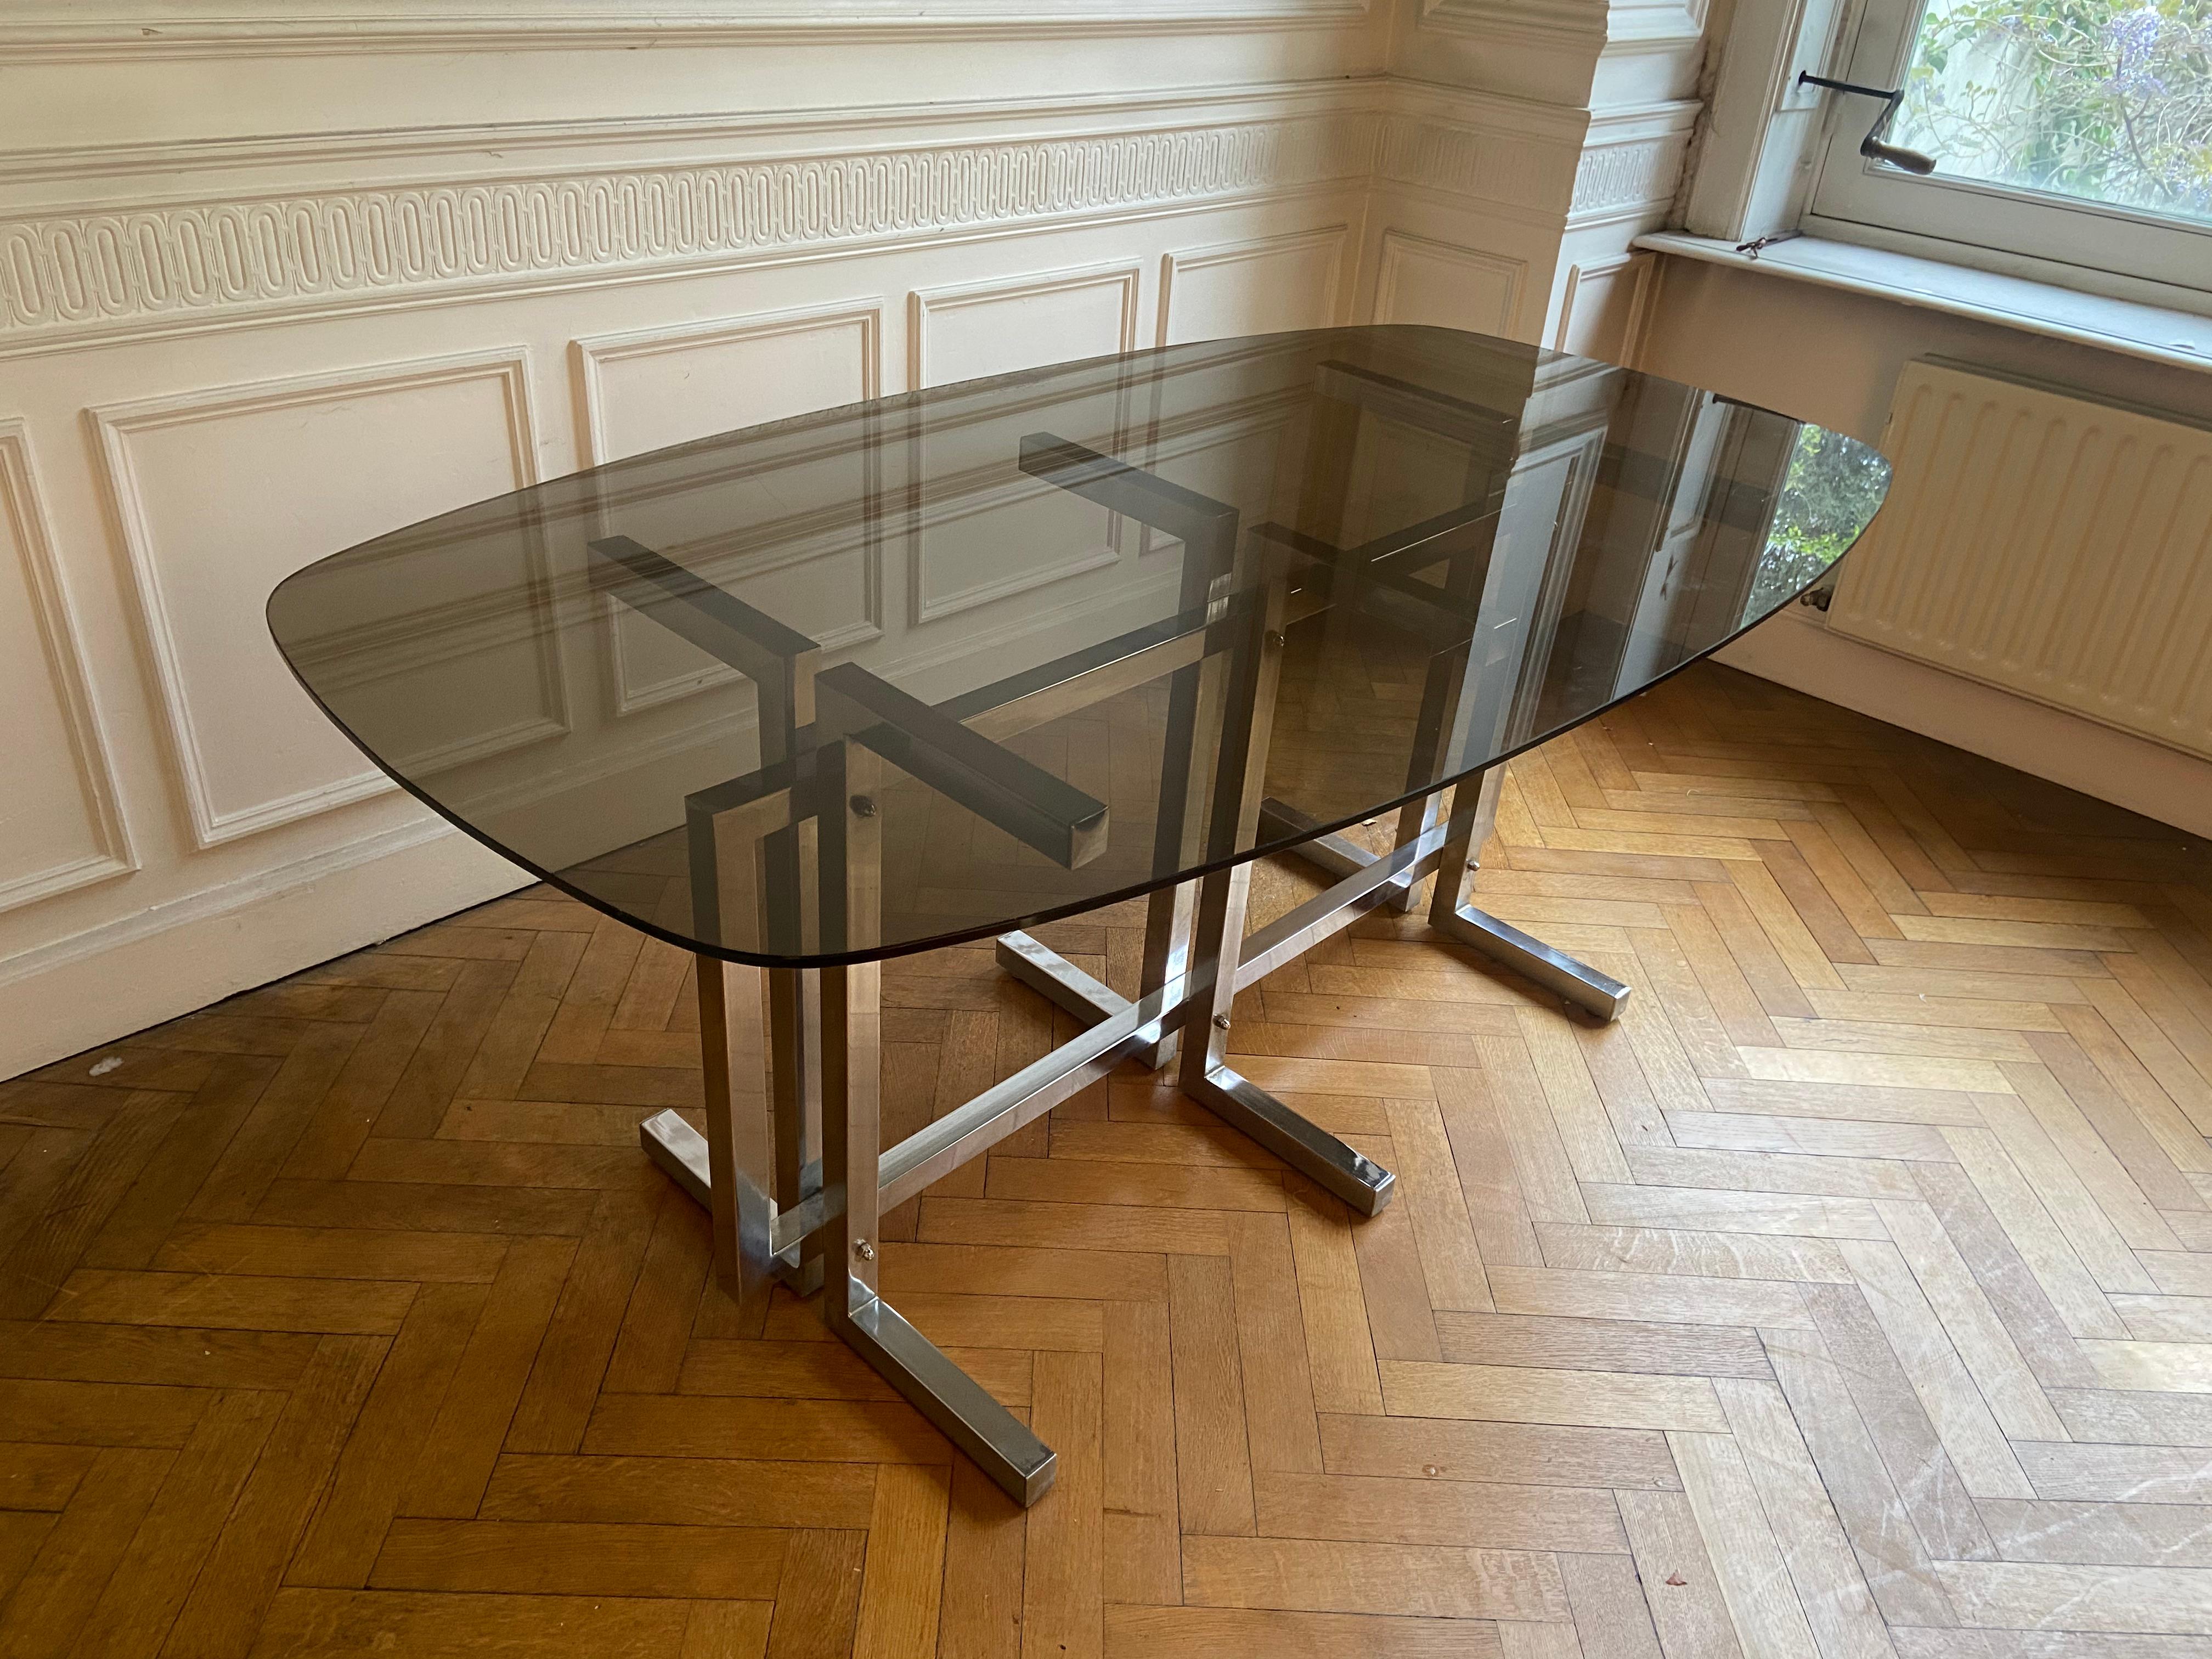 Vintage dining table. Graphic feet in chrome metal. Smoked glass top. 4